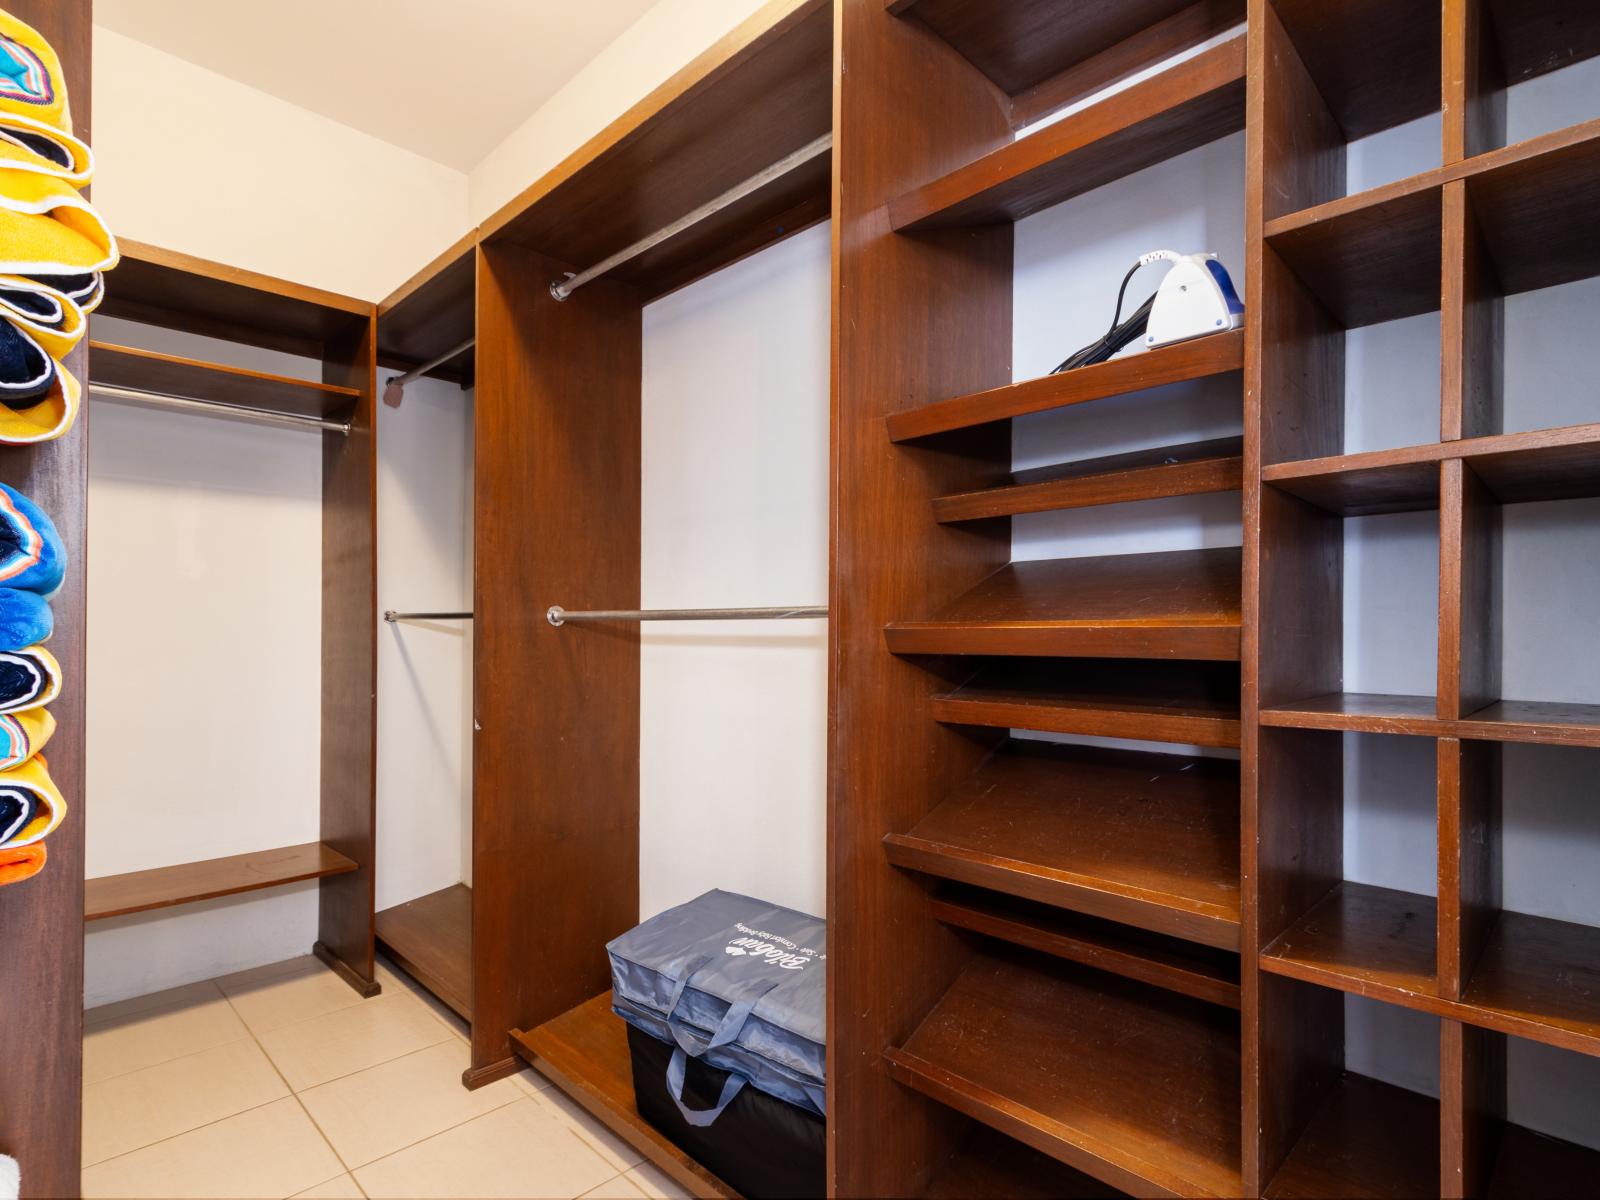 Spacious Walk In Closet of the Apartment in Noord Aruba - Store more of your thing - Custom-built shelving ensures functionality and a clutter-free environment